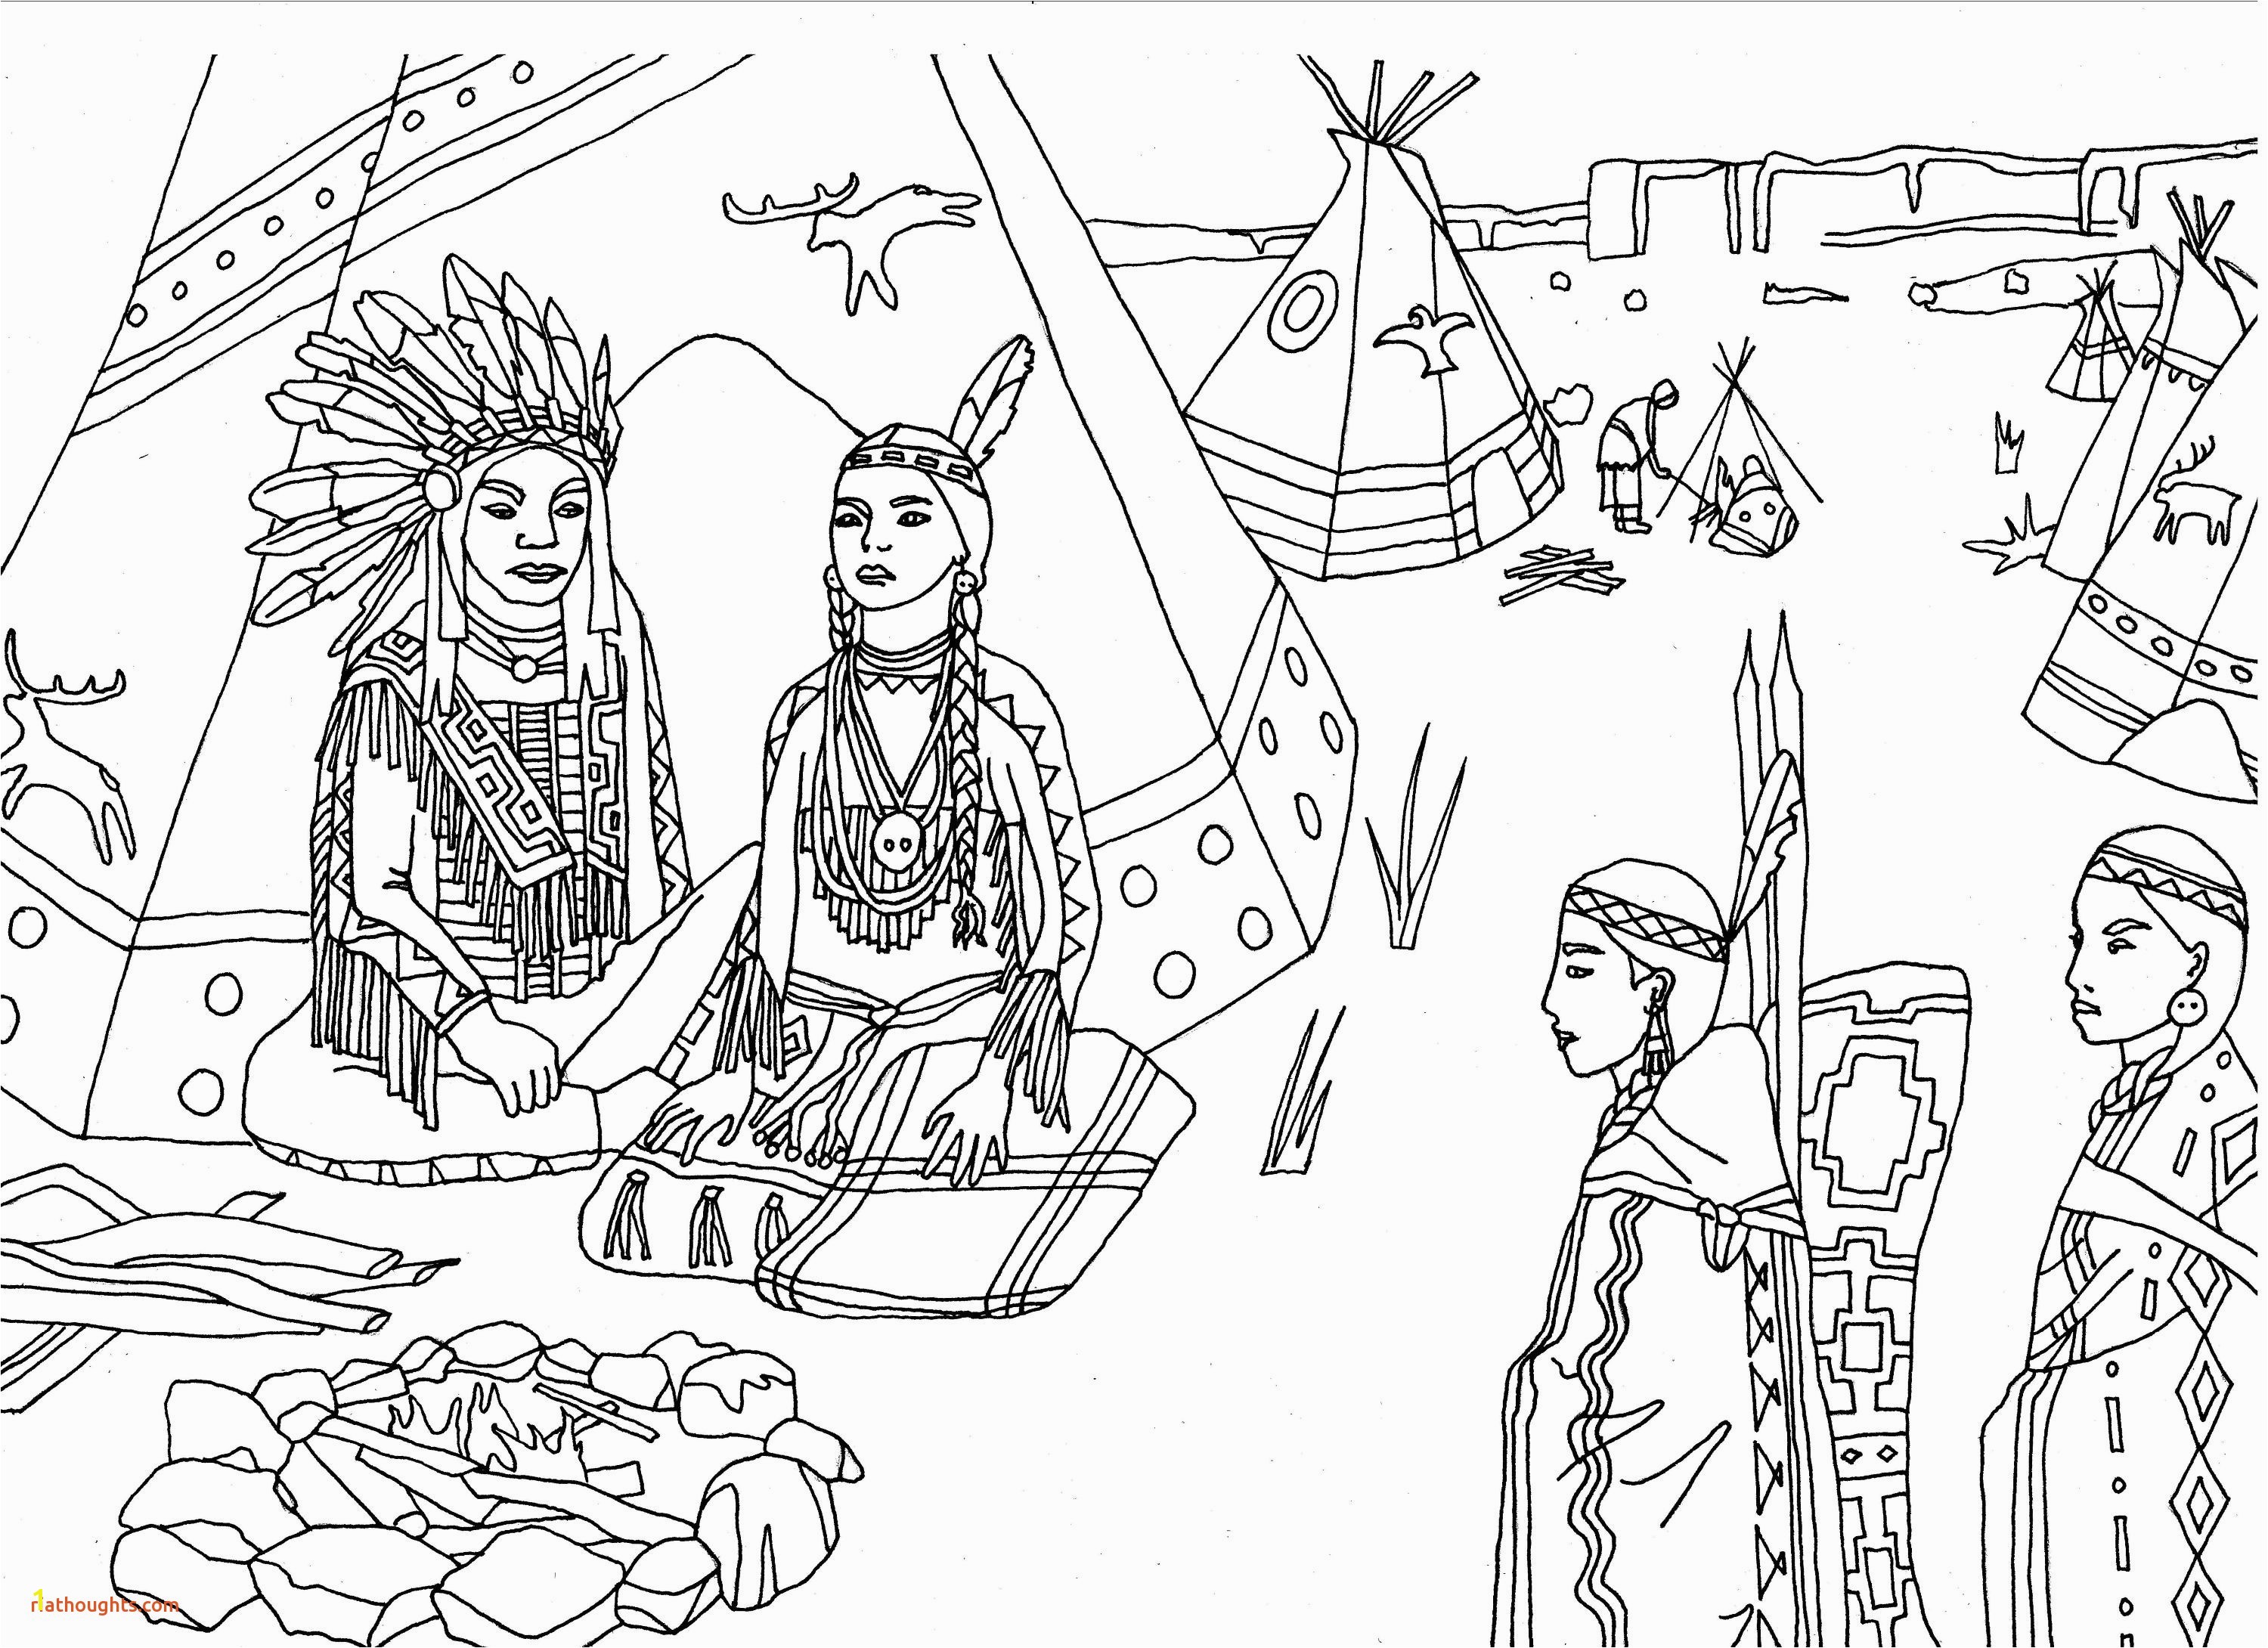 French and Indian War Coloring Pages New Coloring Pages Native American Designs